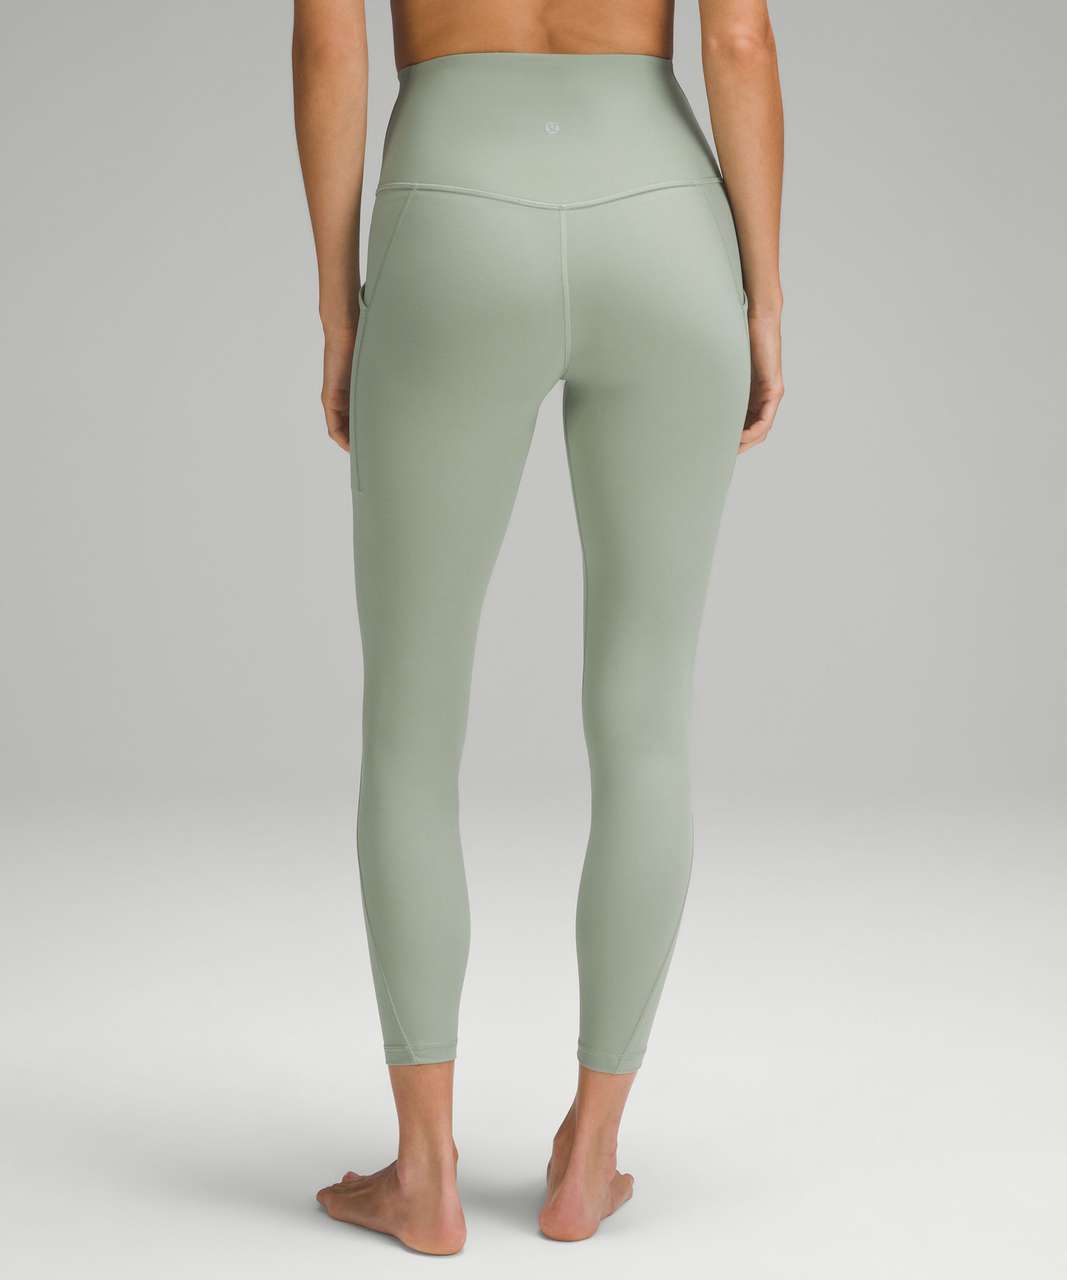 Lululemon Align High-Rise Pant with Pockets 25" - Palm Court